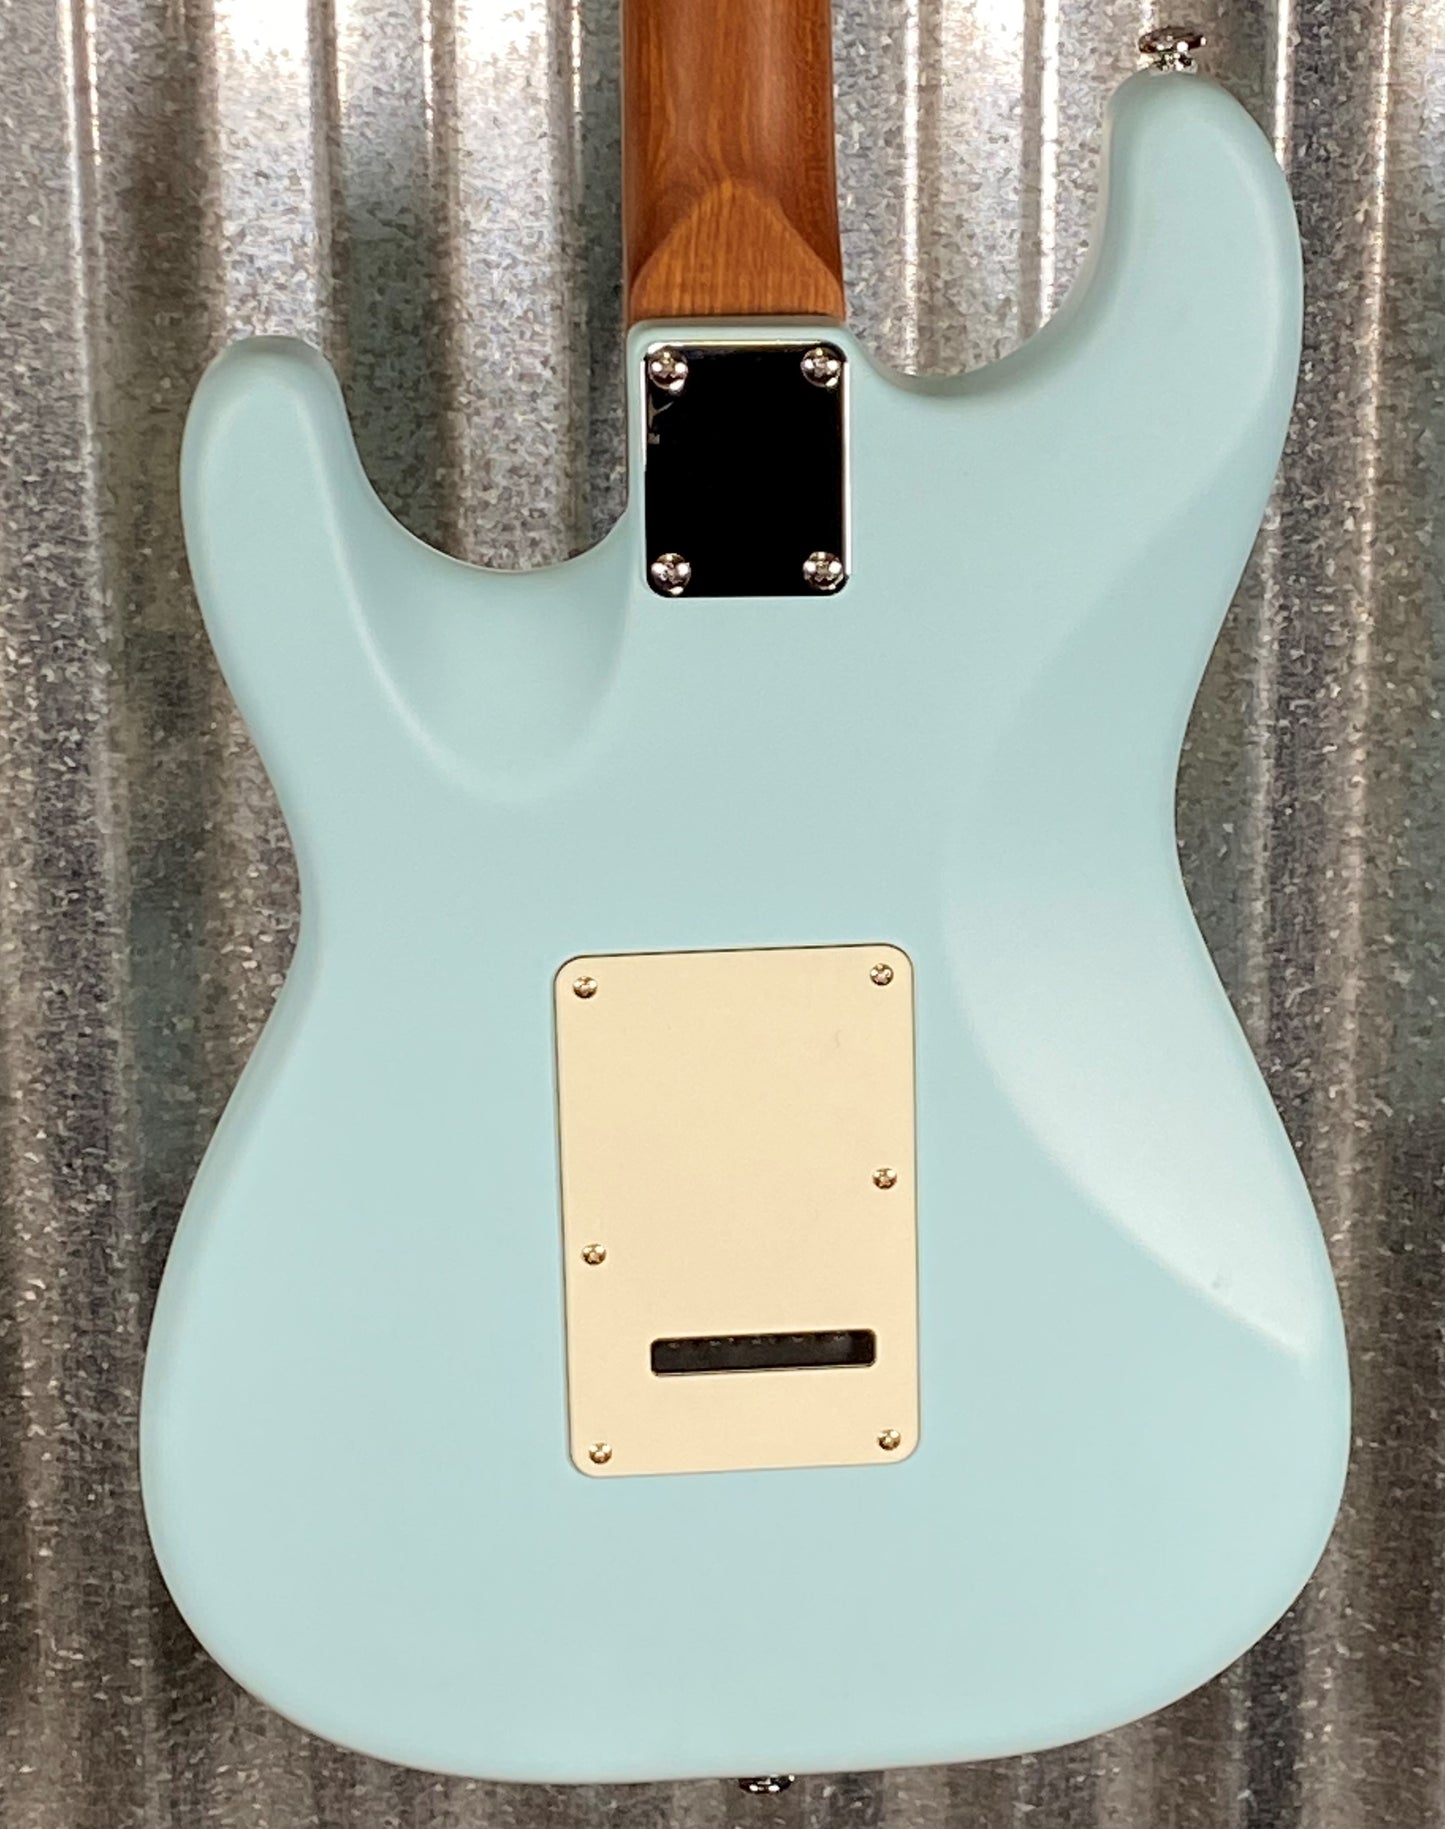 Musi Capricorn Classic HSS Stratocaster Matte Baby Blue Guitar #5081 Used